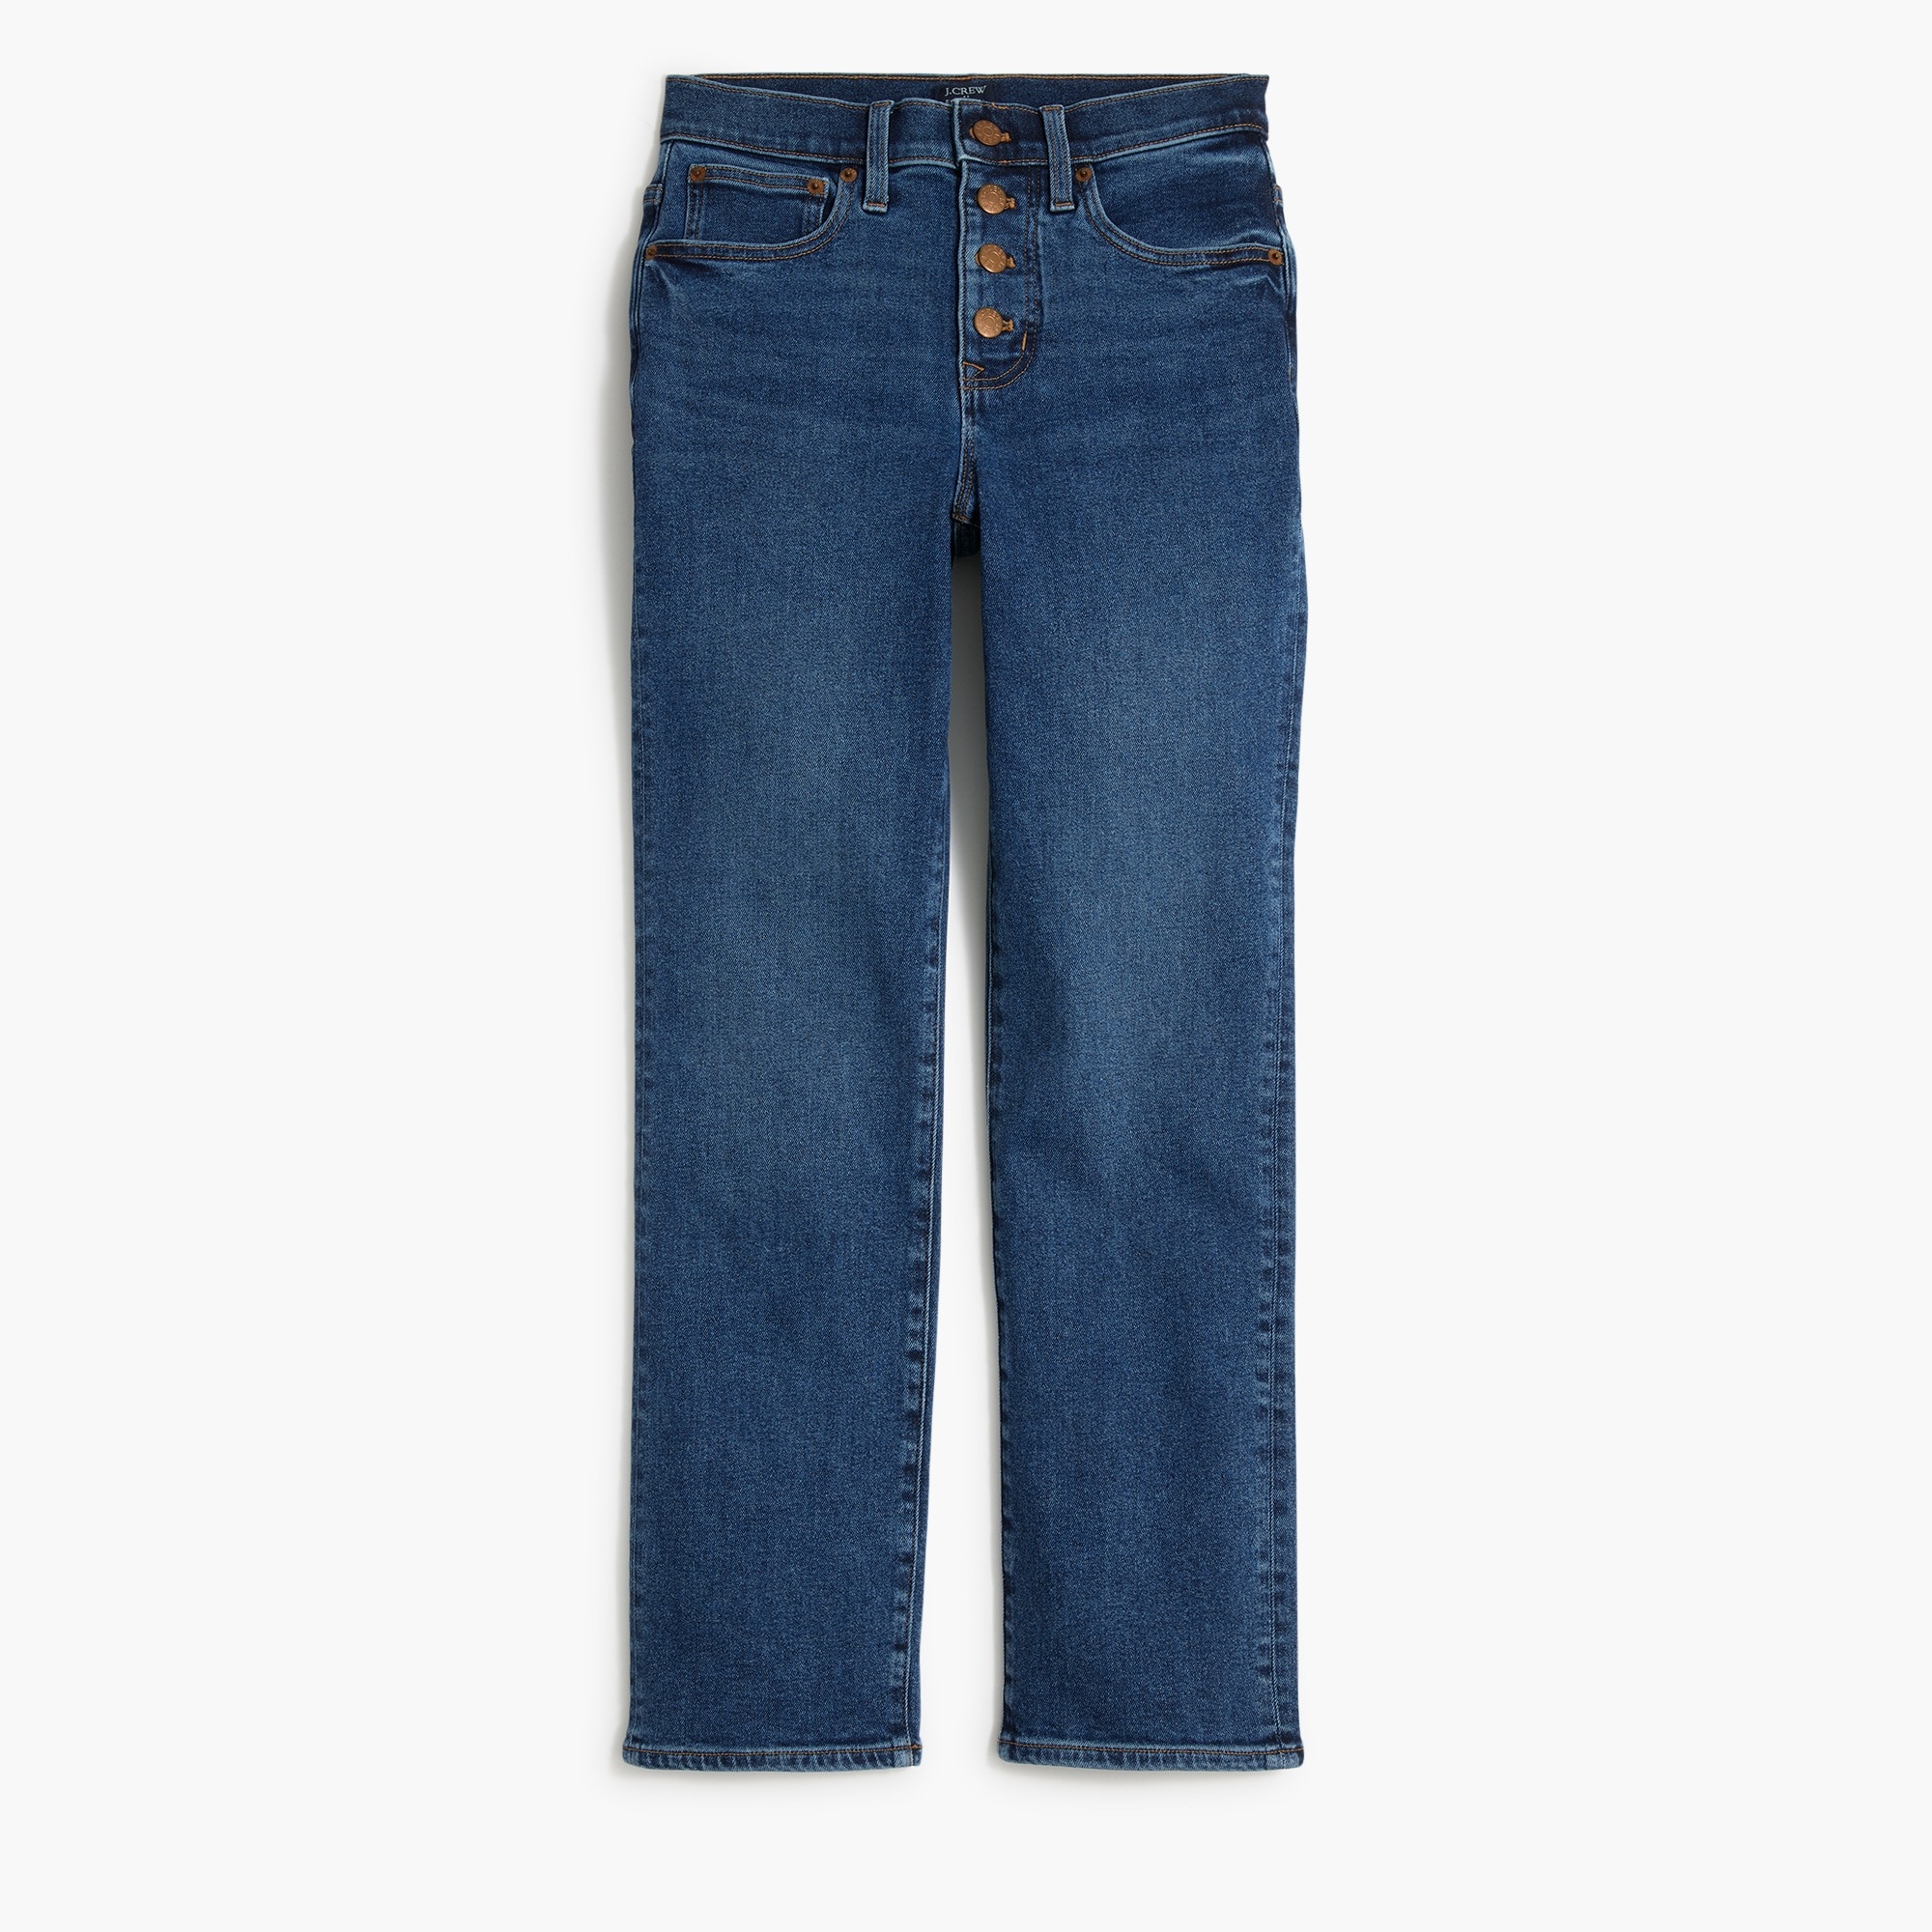  Petite essential straight jean in all-day stretch